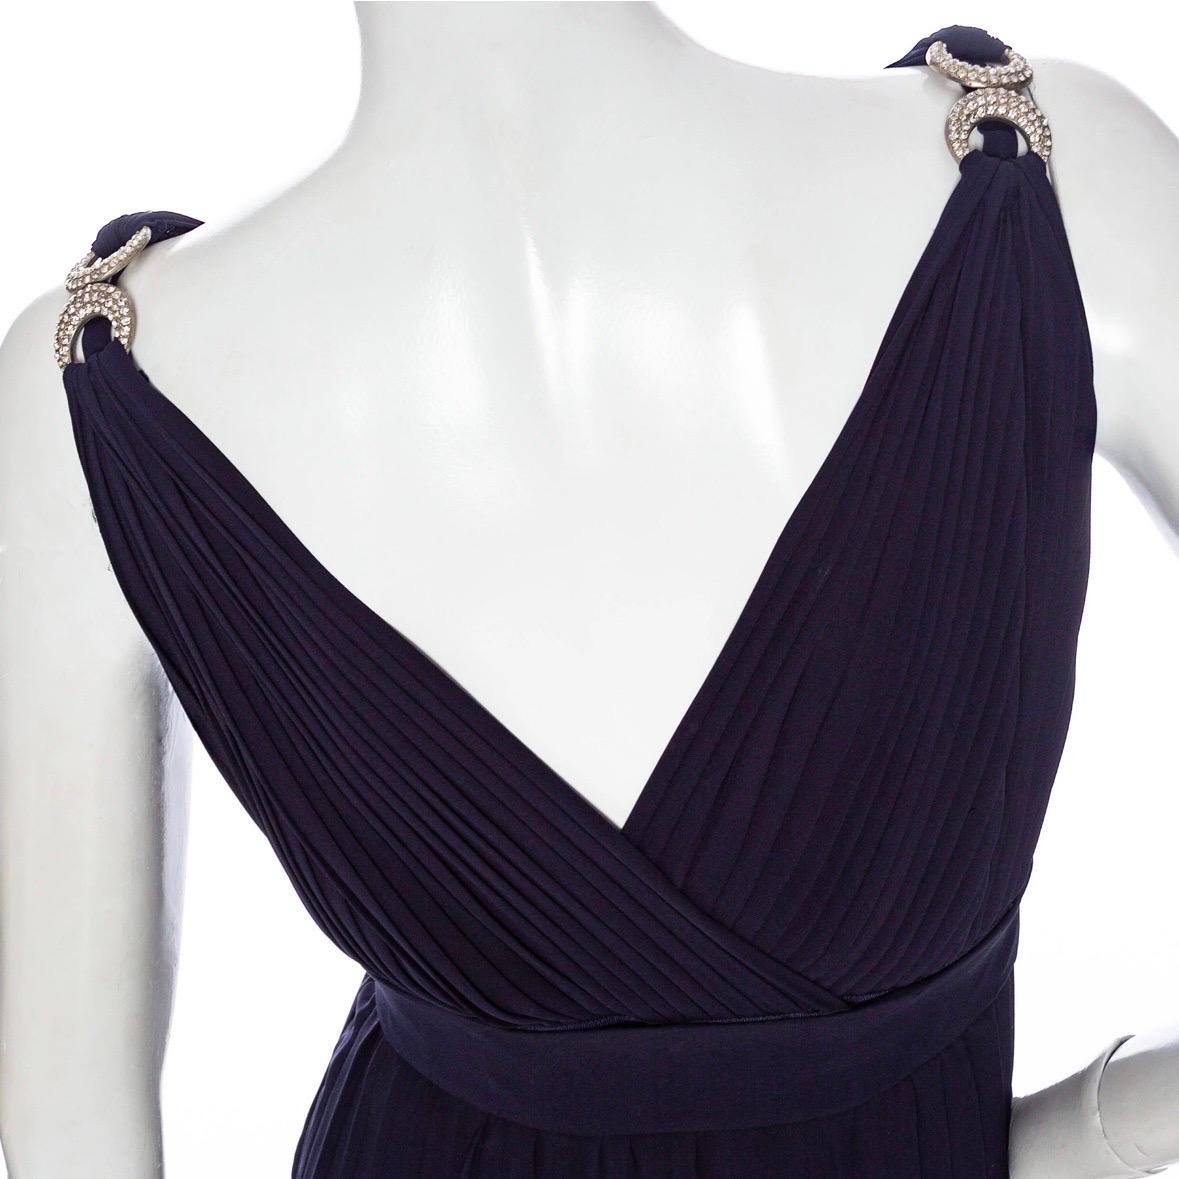 Yves Saint Laurent 1970s Navy Pleated Two-Piece Rhinestone Maxi Dress In Good Condition For Sale In Los Angeles, CA